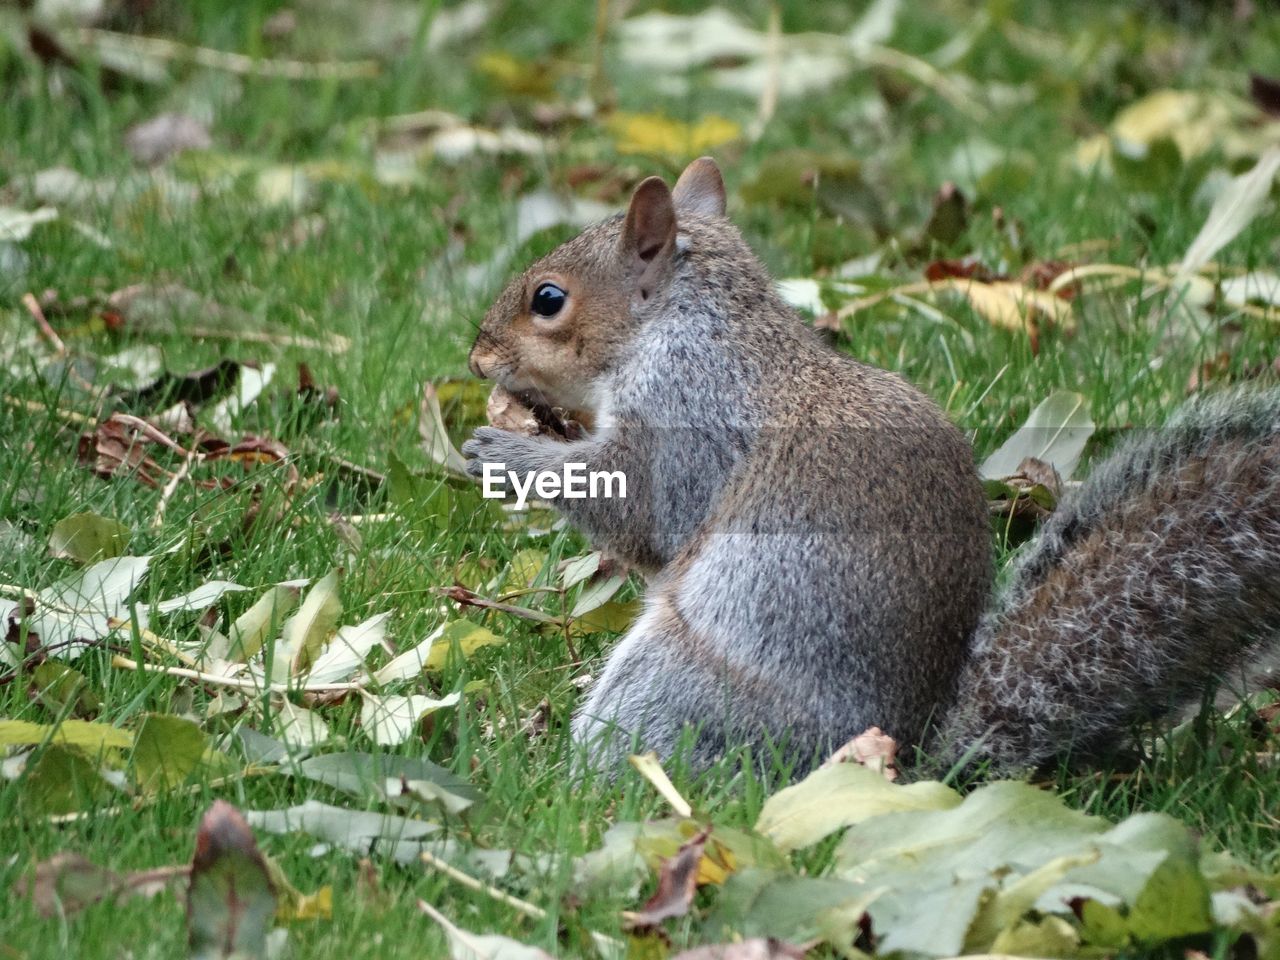 CLOSE-UP OF SQUIRREL IN FIELD